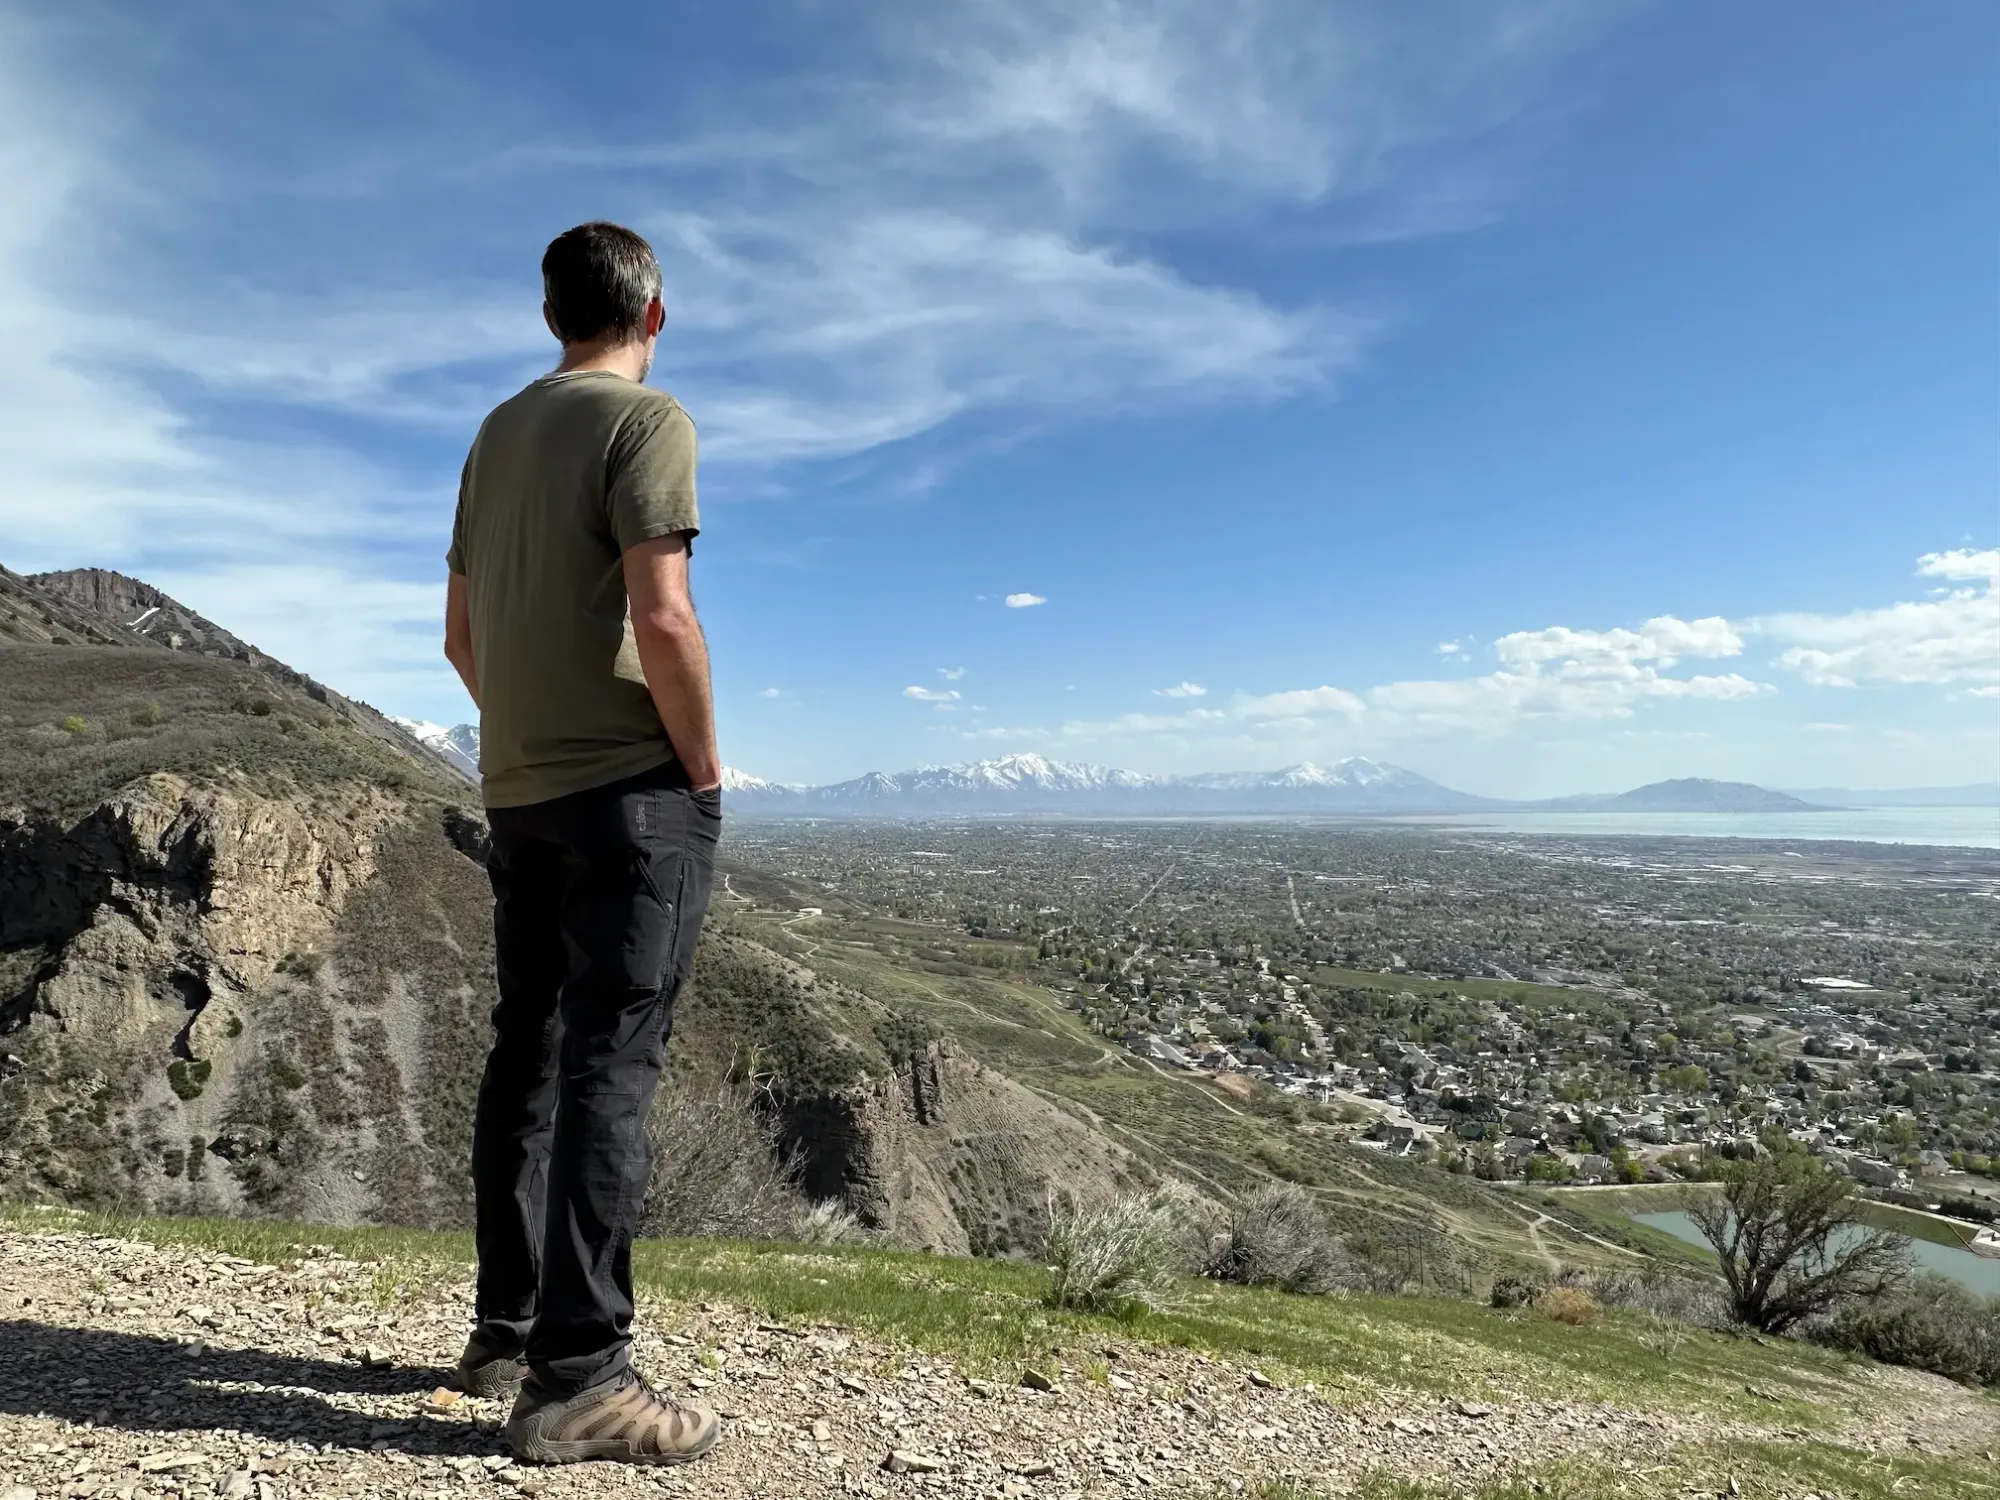 Keith is admiring the view of Utah Valley while hiking in Grove Creek Canyon.